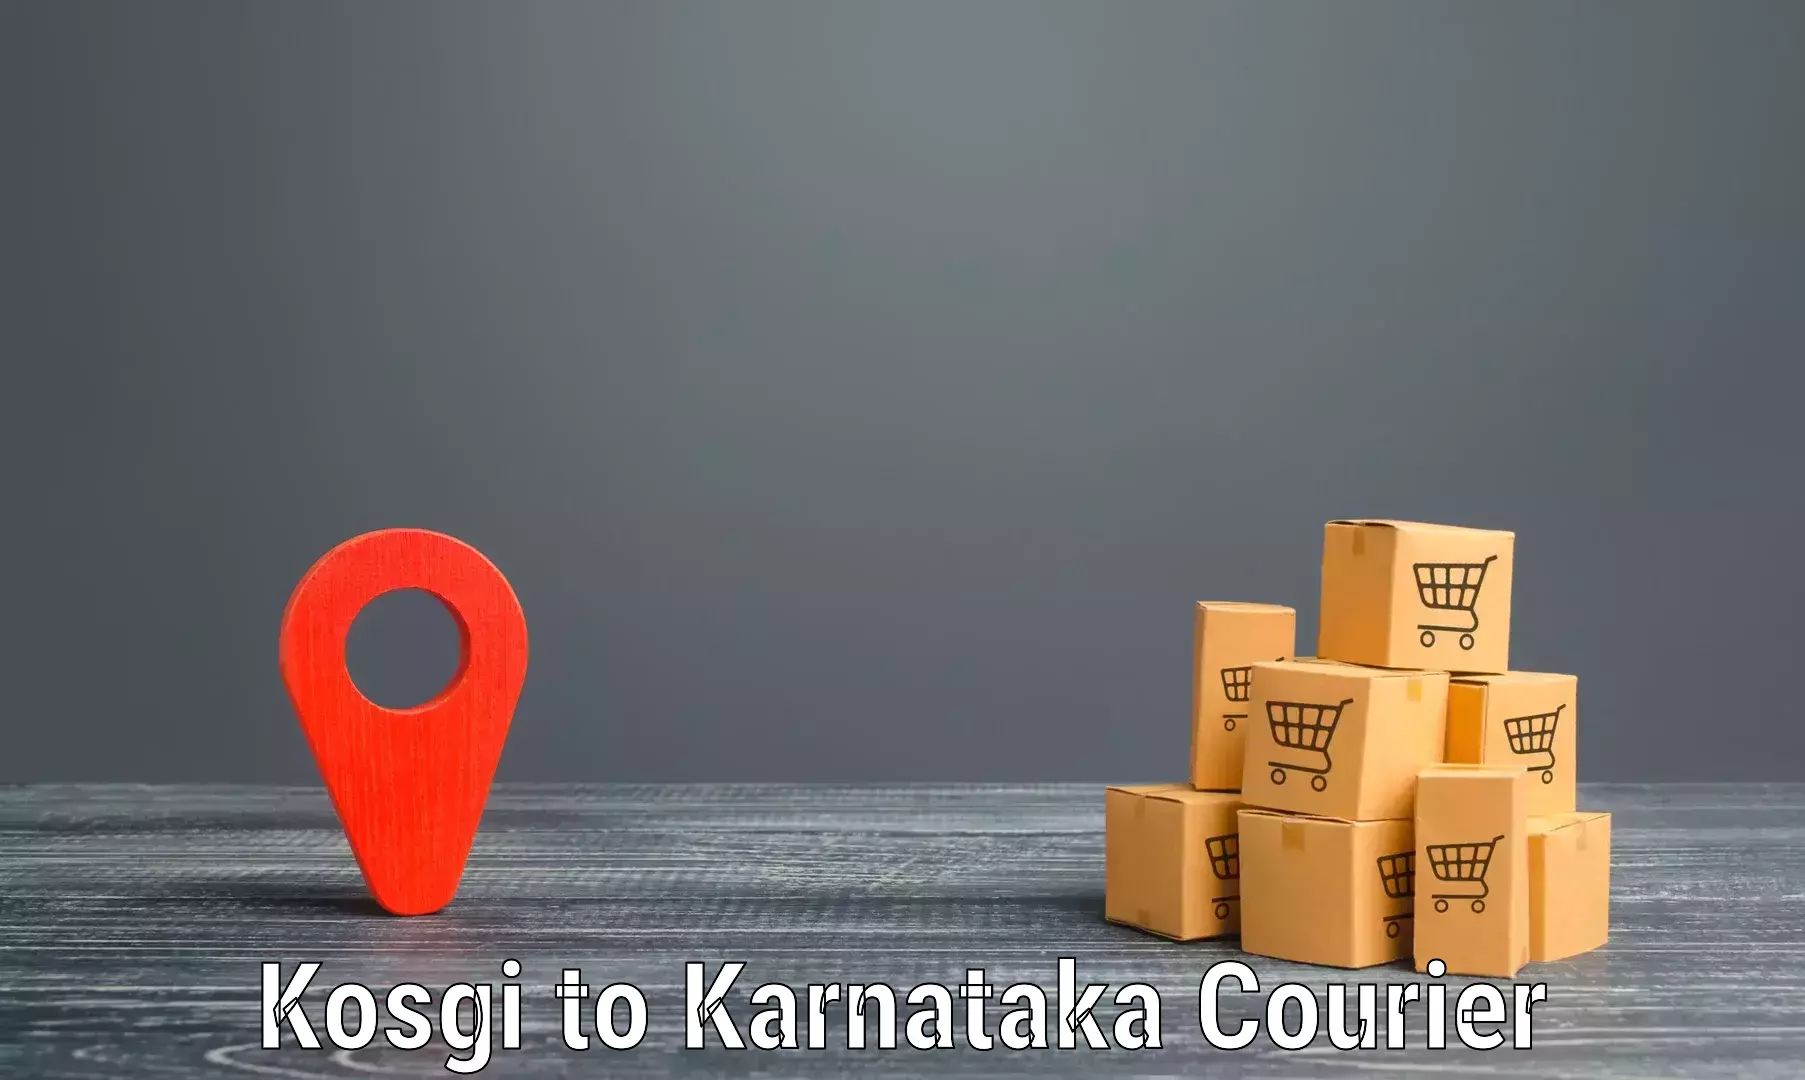 Express delivery network Kosgi to Mangalore Port